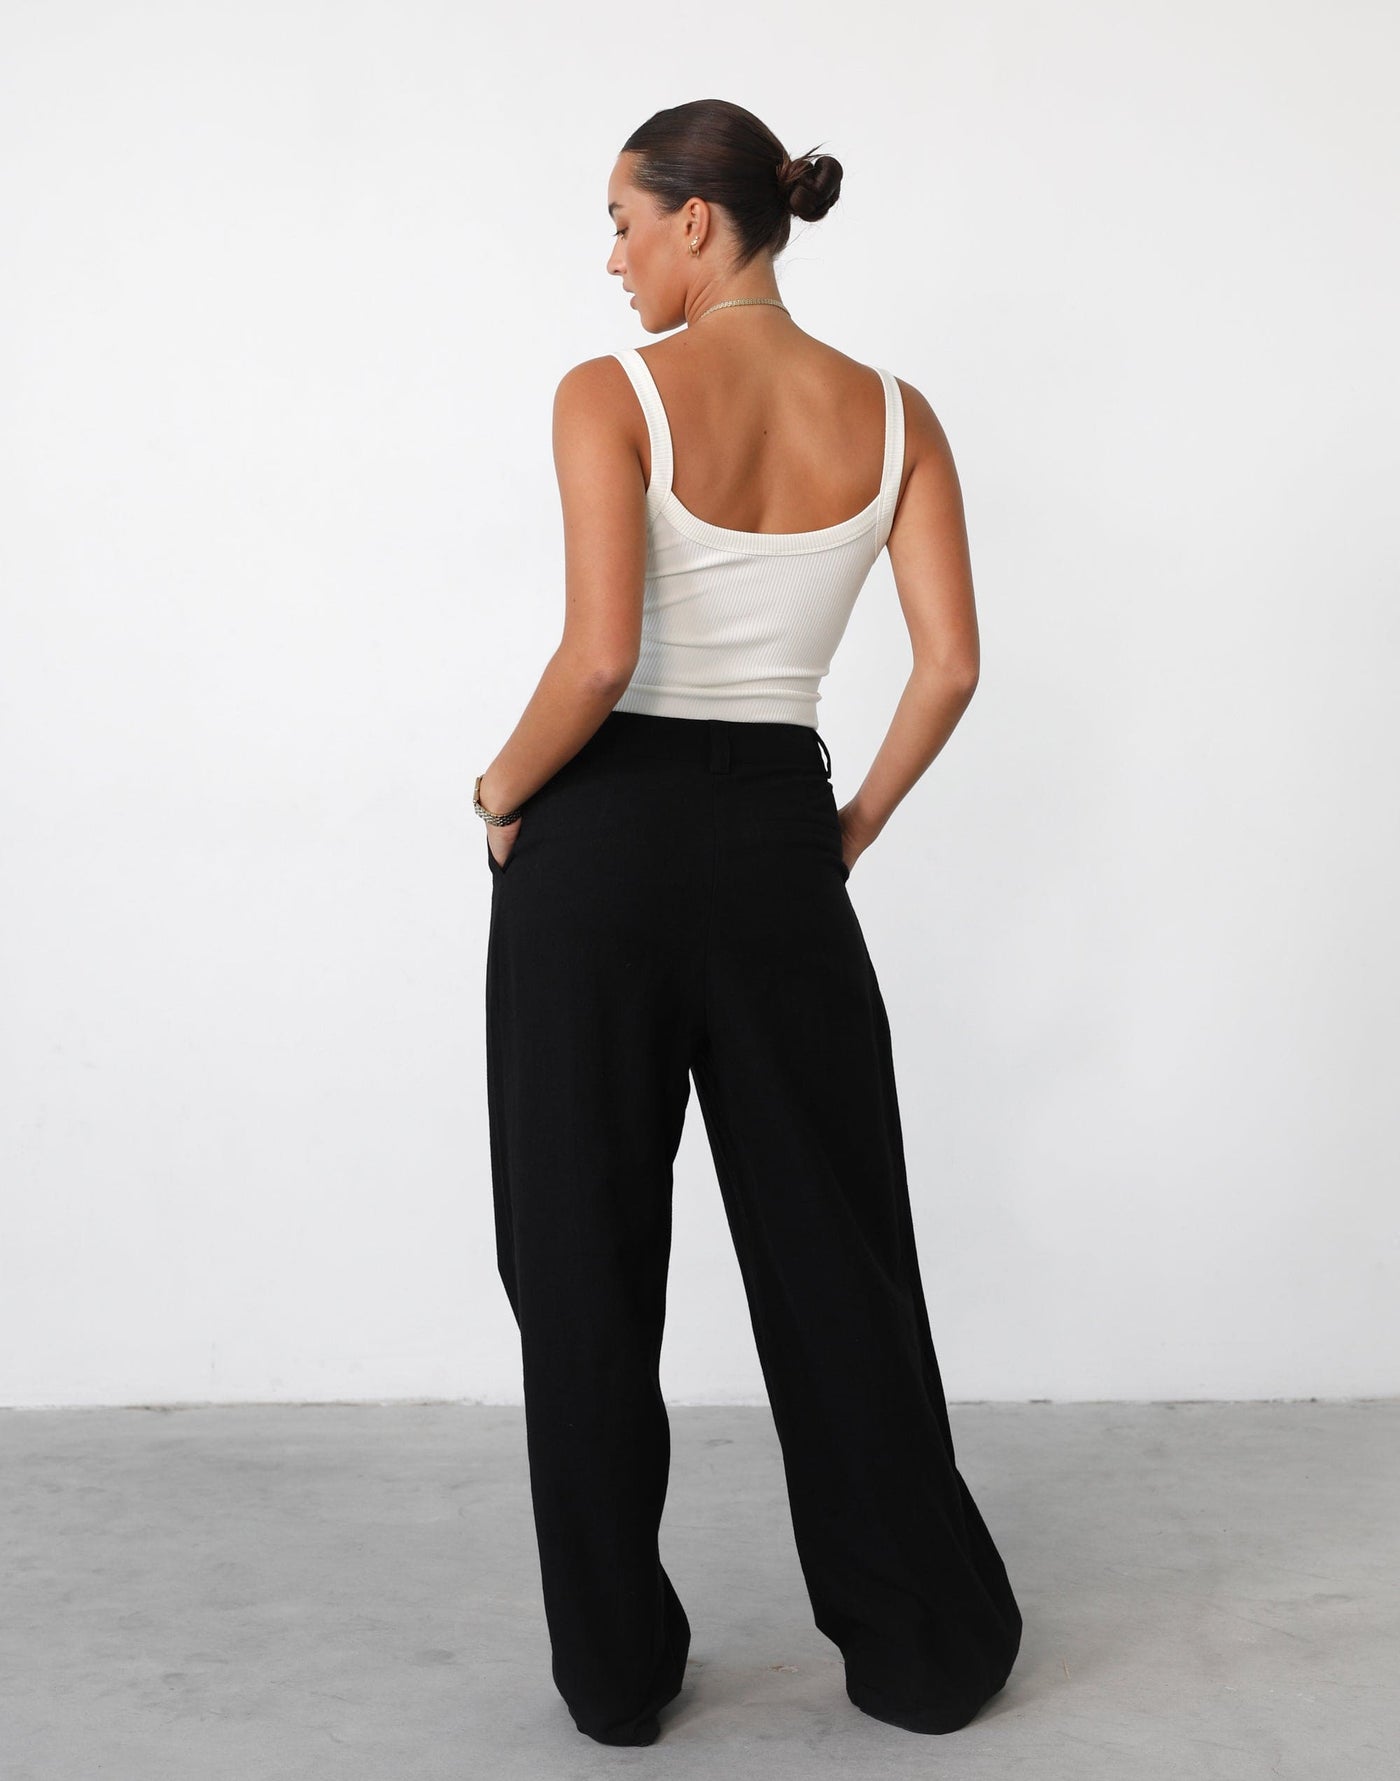 Je Suis Pant (Onyx) - By Lioness - Low Rise Straight Leg Pant - Women's Pants - Charcoal Clothing